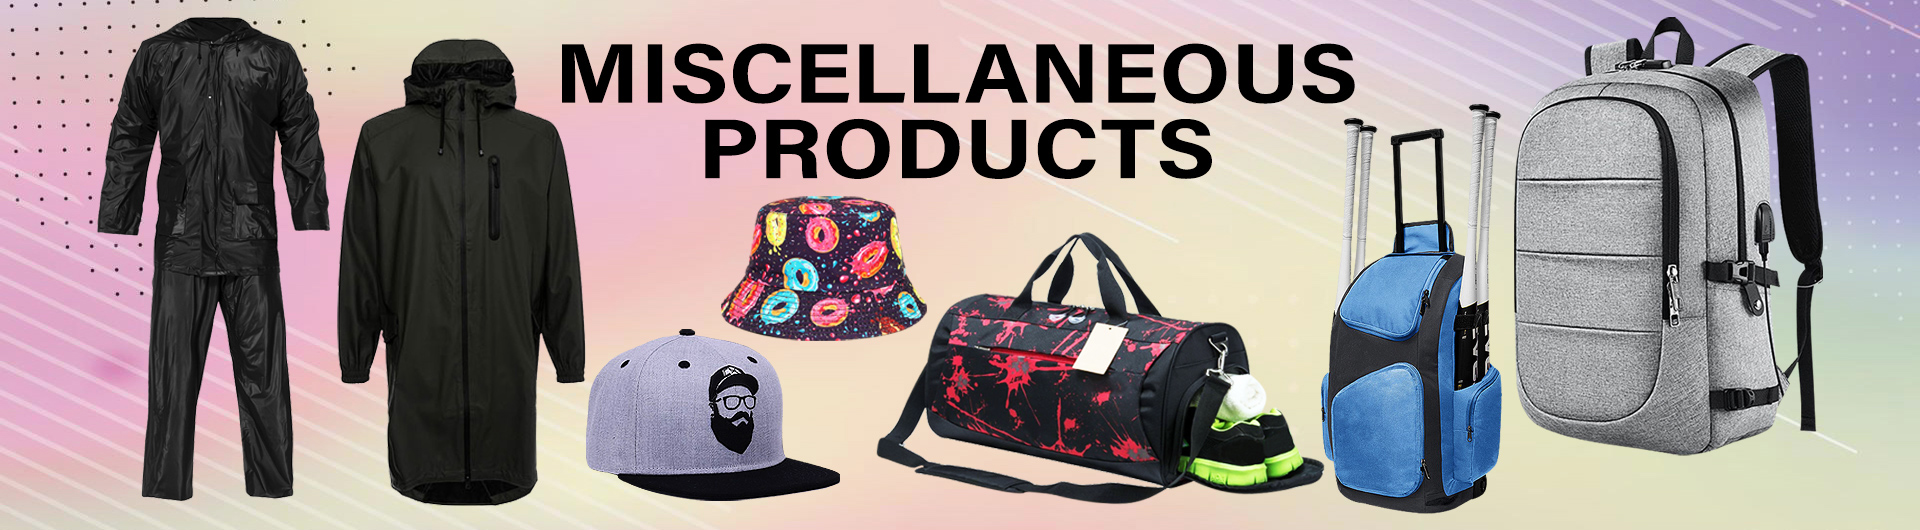 Miscellaneous Products Banner